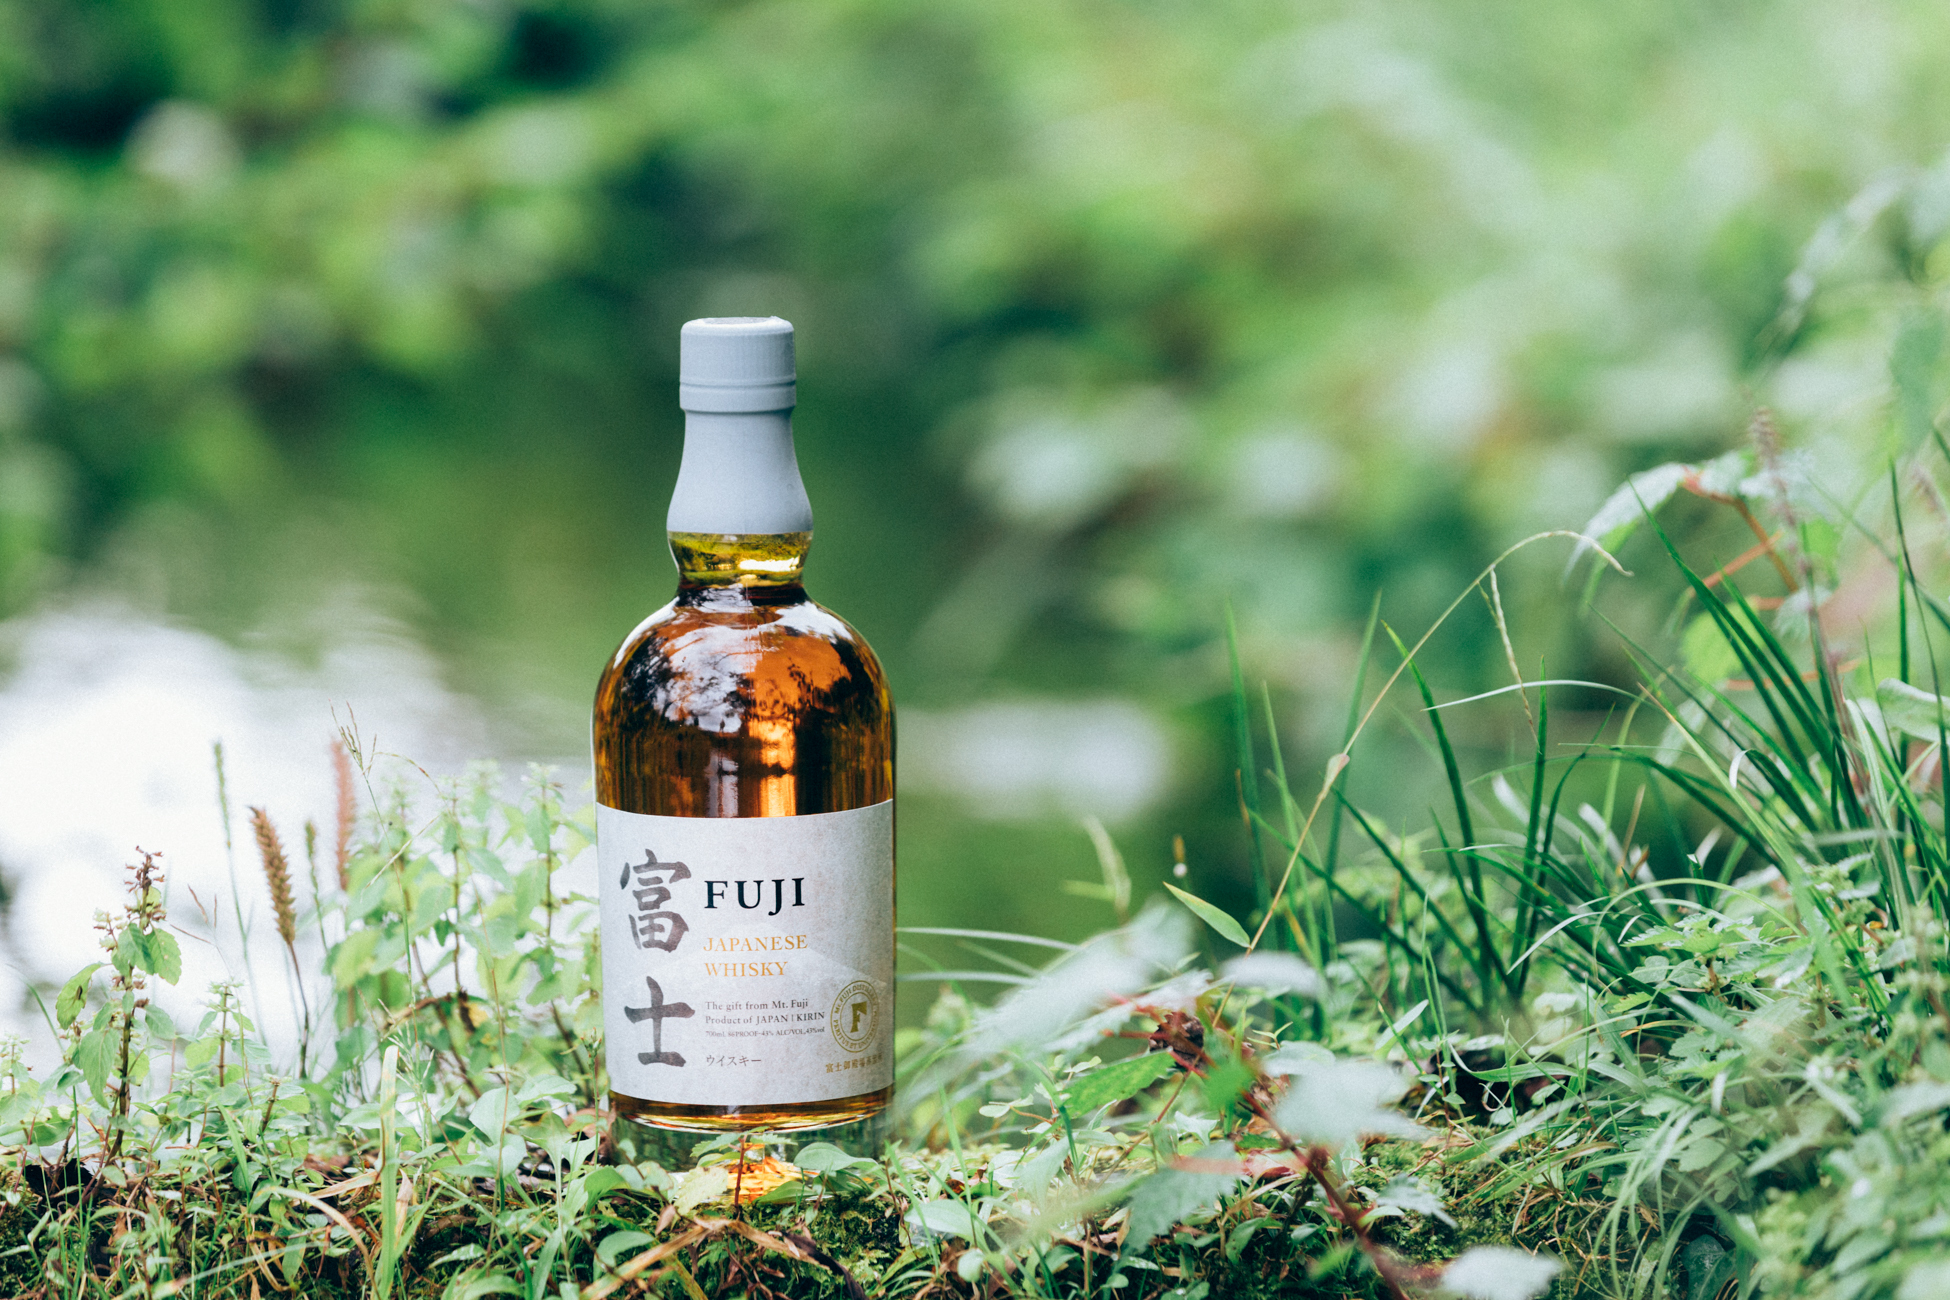 a bottle of FUJI Japanese Whiskey in a grassy field